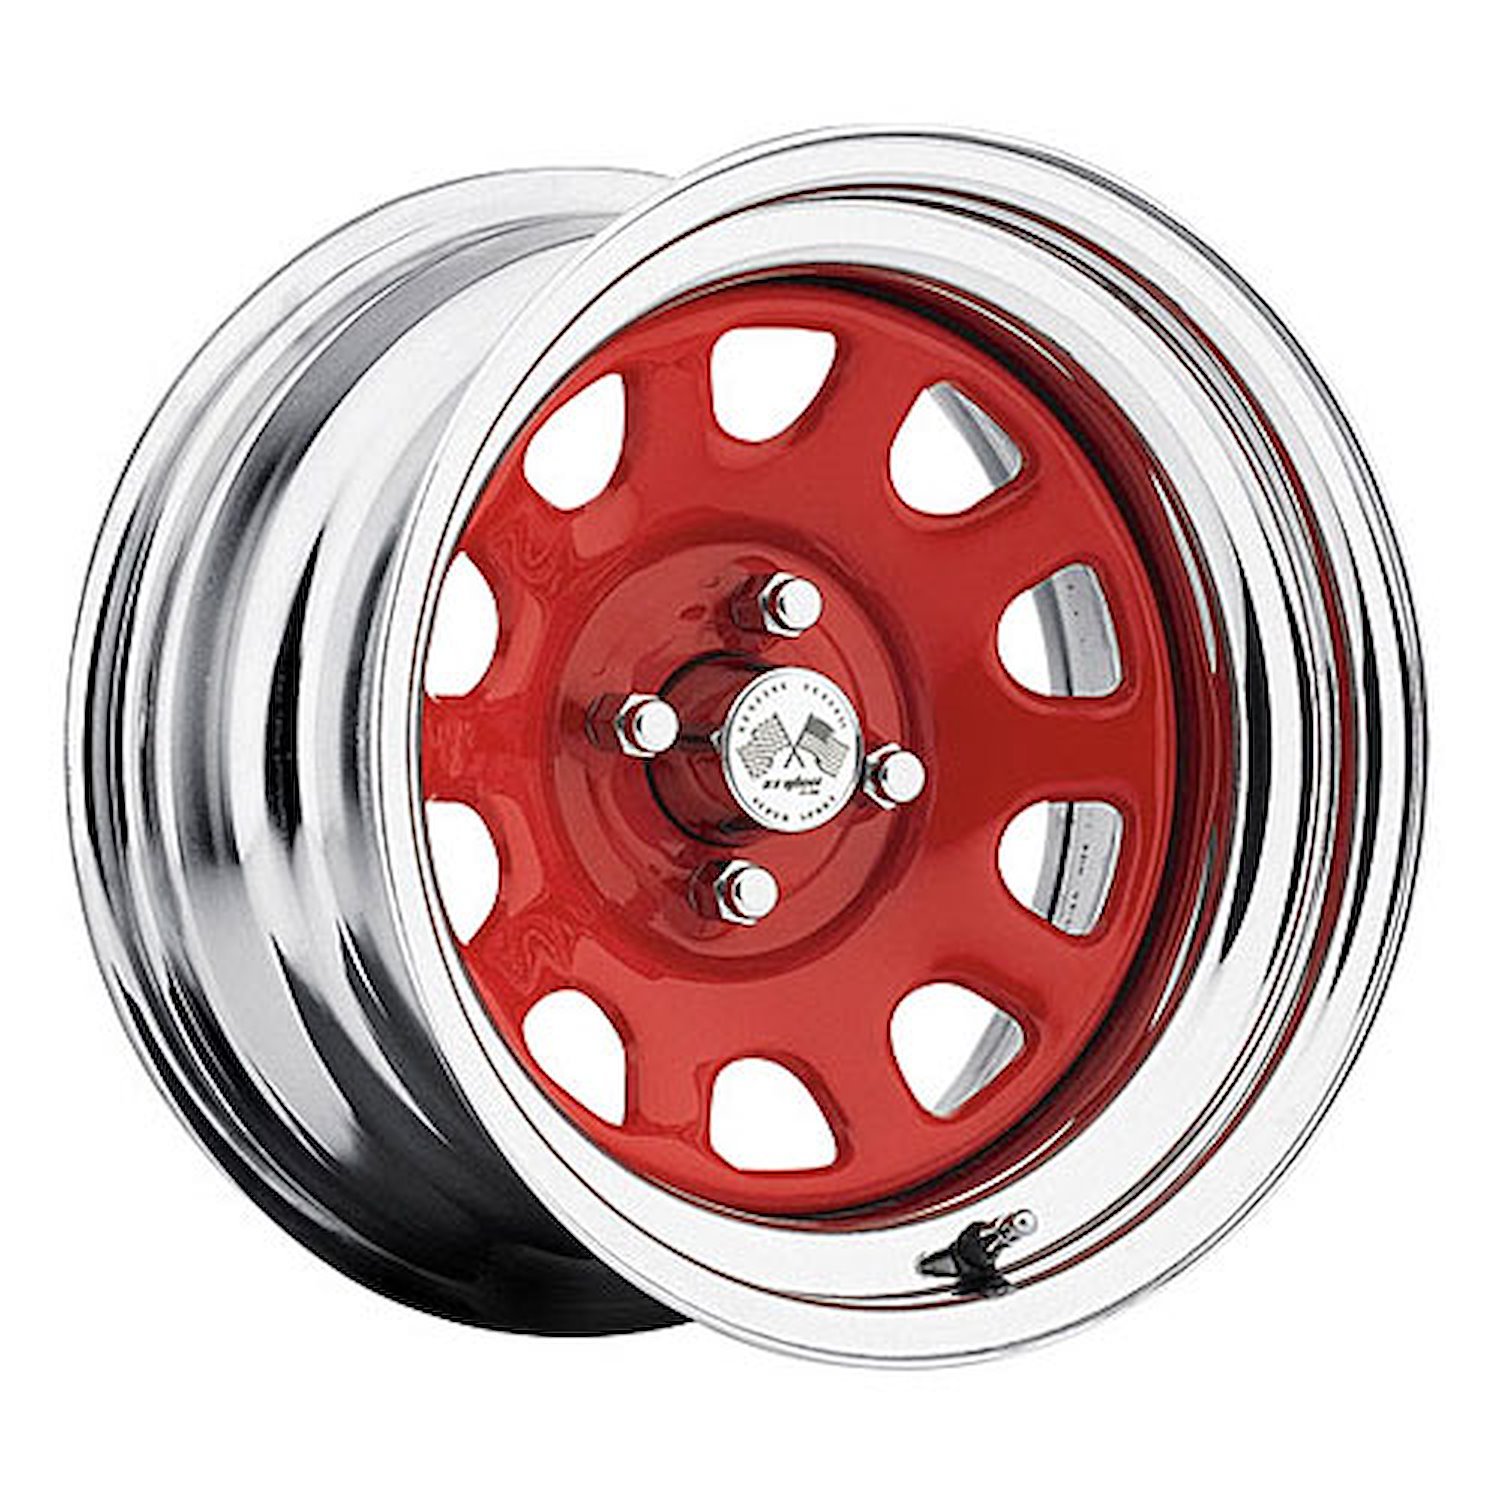 CHROME DAYTONA FWD DRIFTER RED 16 x 10 4 x 100 Bolt Circle 55 Back Spacing 0 offset 266 Center Bore 1400 lbs Load Rating